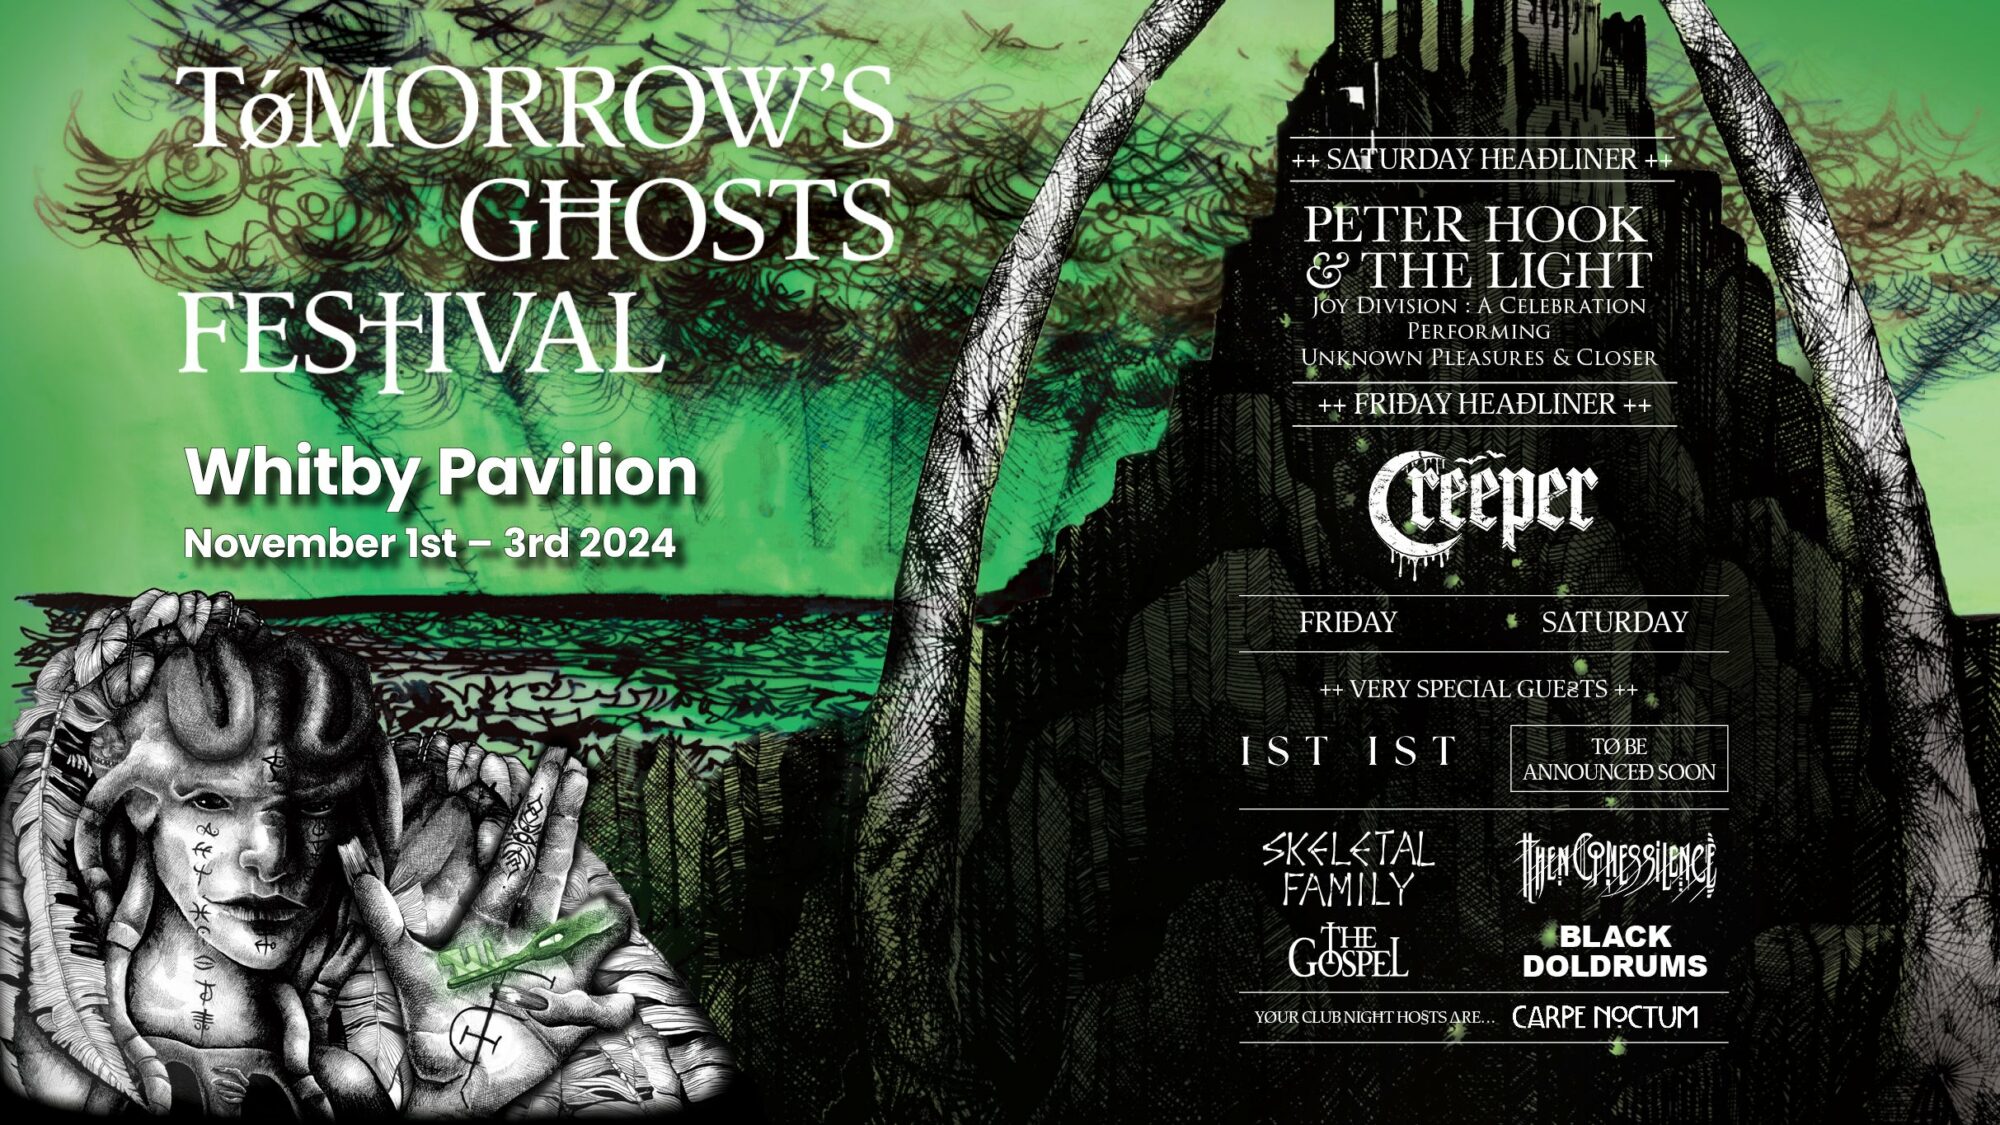 Image name Tomorrows Ghosts Festival Friday Night Ticket at Whitby Pavilion Northern Lights Suite Whitby the 16 image from the post Tomorrows Ghosts Festival Saturday Night Ticket at Whitby Pavilion Northern Lights Suite, Whitby in Yorkshire.com.